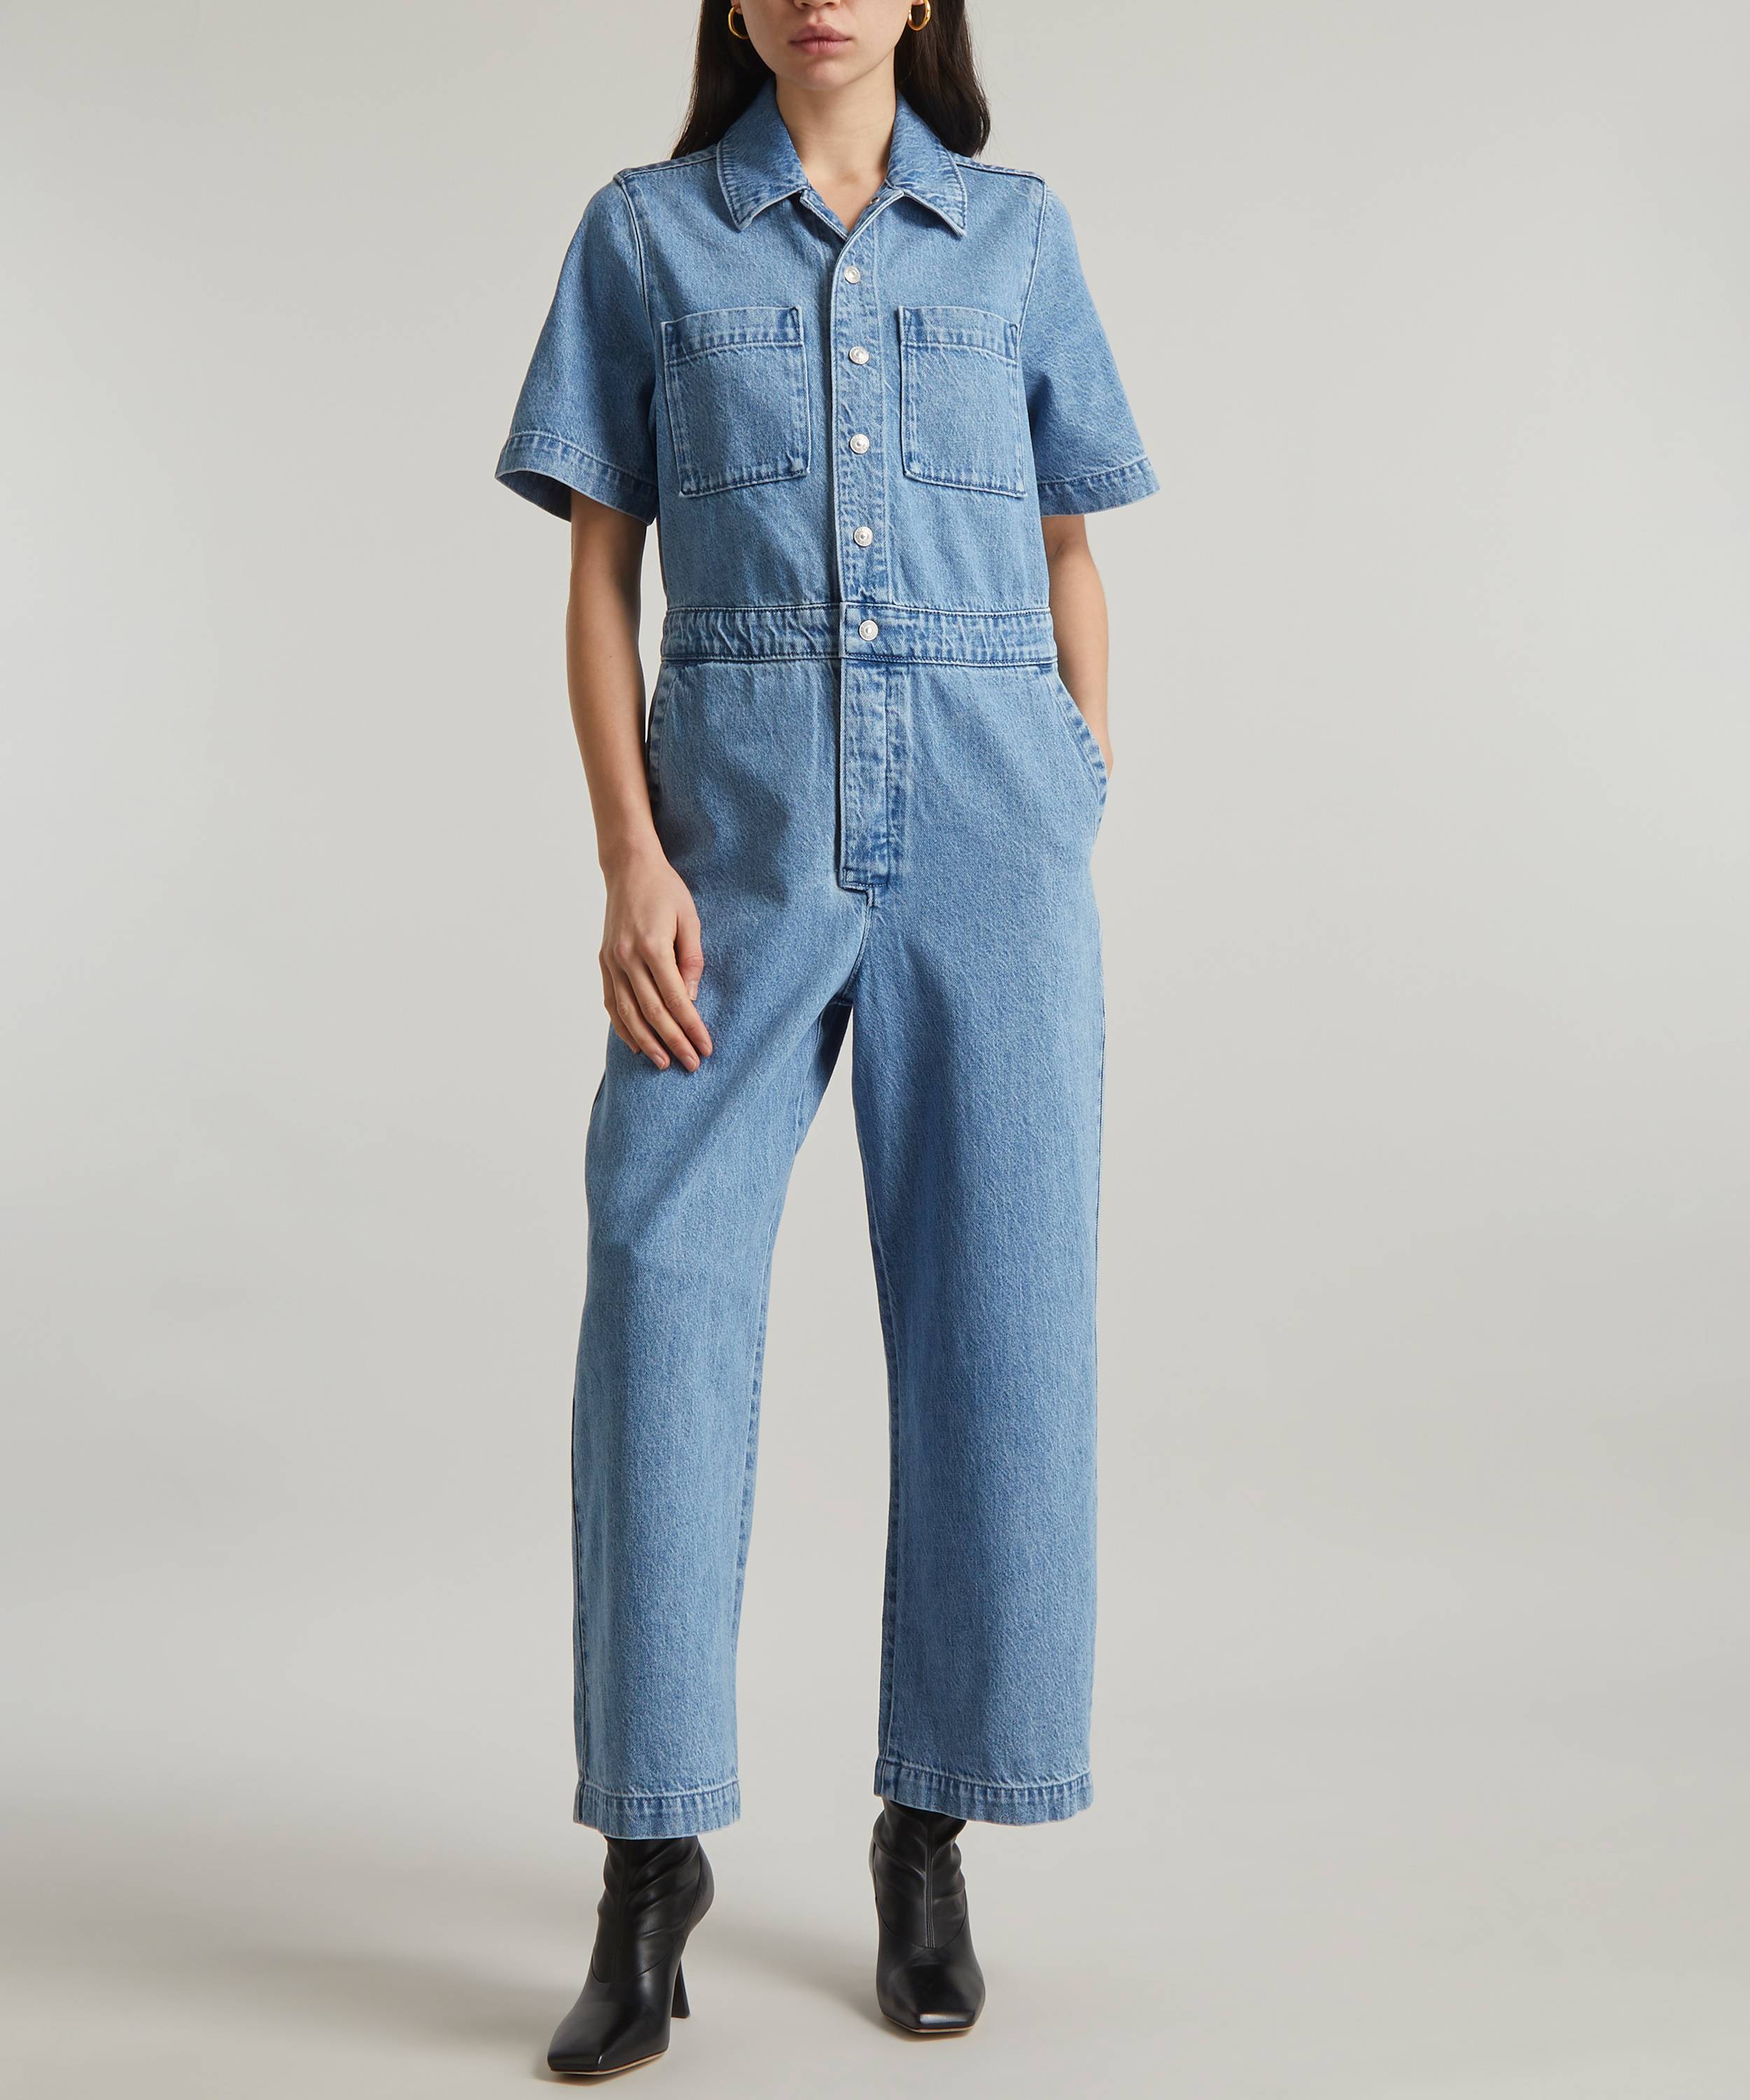 Levi's Red Tab Short-Sleeve Boiler Suit | Liberty